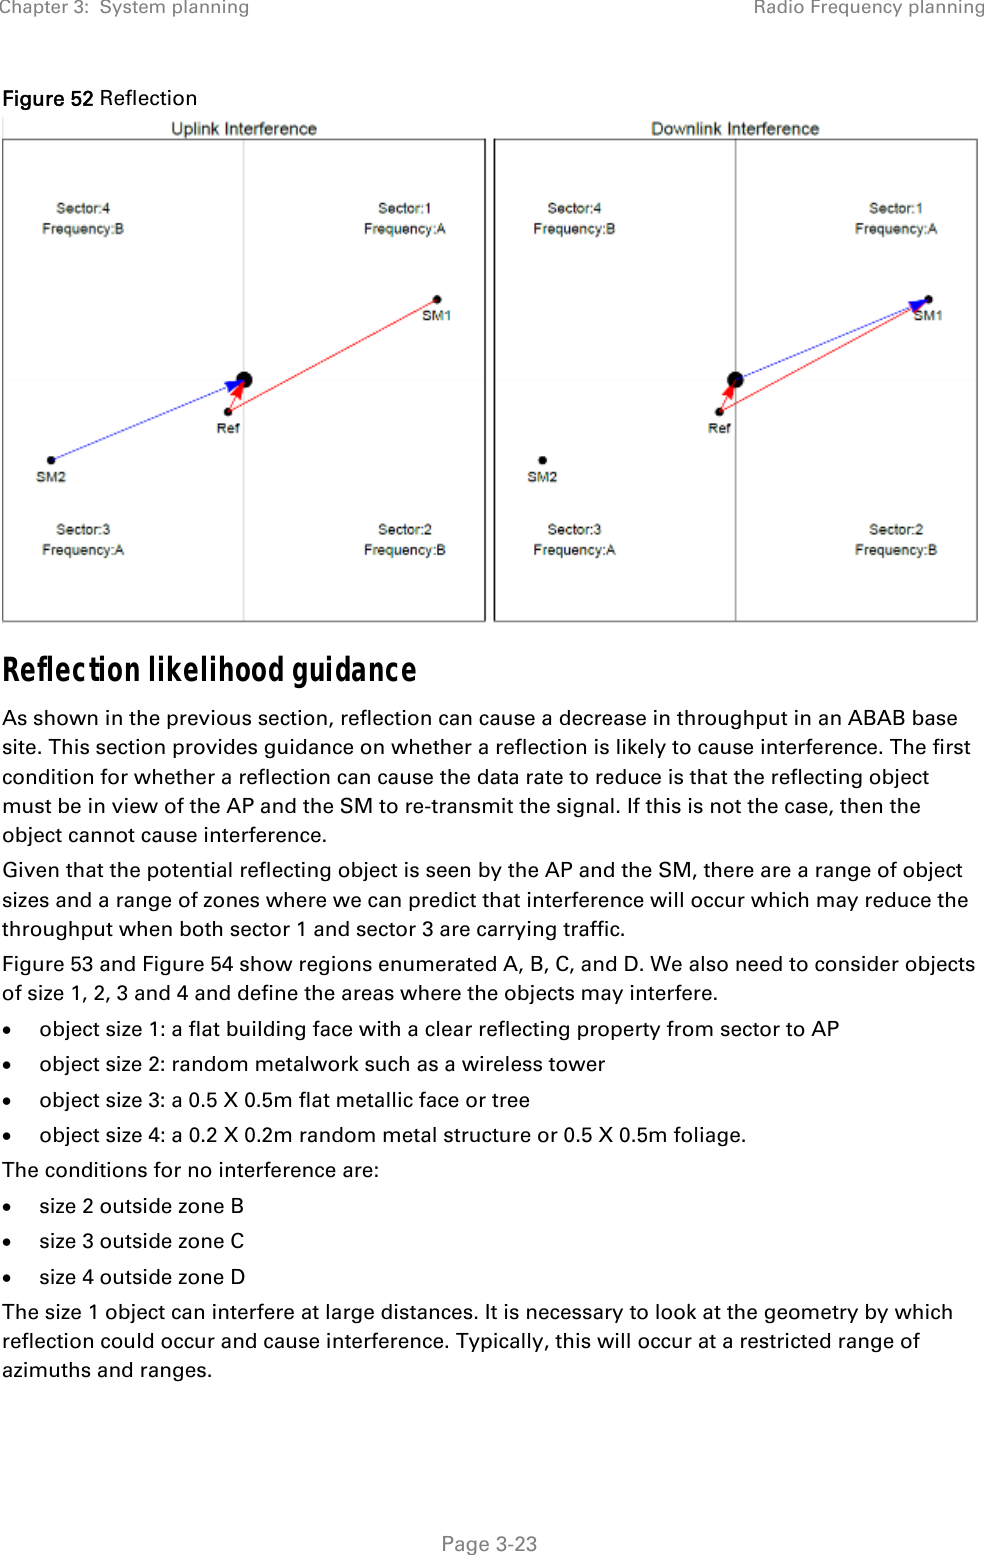 Chapter 3:  System planning  Radio Frequency planning   Page 3-23 Figure 52 Reflection  Reflection likelihood guidance As shown in the previous section, reflection can cause a decrease in throughput in an ABAB base site. This section provides guidance on whether a reflection is likely to cause interference. The first condition for whether a reflection can cause the data rate to reduce is that the reflecting object must be in view of the AP and the SM to re-transmit the signal. If this is not the case, then the object cannot cause interference. Given that the potential reflecting object is seen by the AP and the SM, there are a range of object sizes and a range of zones where we can predict that interference will occur which may reduce the throughput when both sector 1 and sector 3 are carrying traffic.  Figure 53 and Figure 54 show regions enumerated A, B, C, and D. We also need to consider objects of size 1, 2, 3 and 4 and define the areas where the objects may interfere.  object size 1: a flat building face with a clear reflecting property from sector to AP  object size 2: random metalwork such as a wireless tower  object size 3: a 0.5 X 0.5m flat metallic face or tree  object size 4: a 0.2 X 0.2m random metal structure or 0.5 X 0.5m foliage. The conditions for no interference are:  size 2 outside zone B  size 3 outside zone C  size 4 outside zone D The size 1 object can interfere at large distances. It is necessary to look at the geometry by which reflection could occur and cause interference. Typically, this will occur at a restricted range of azimuths and ranges.  